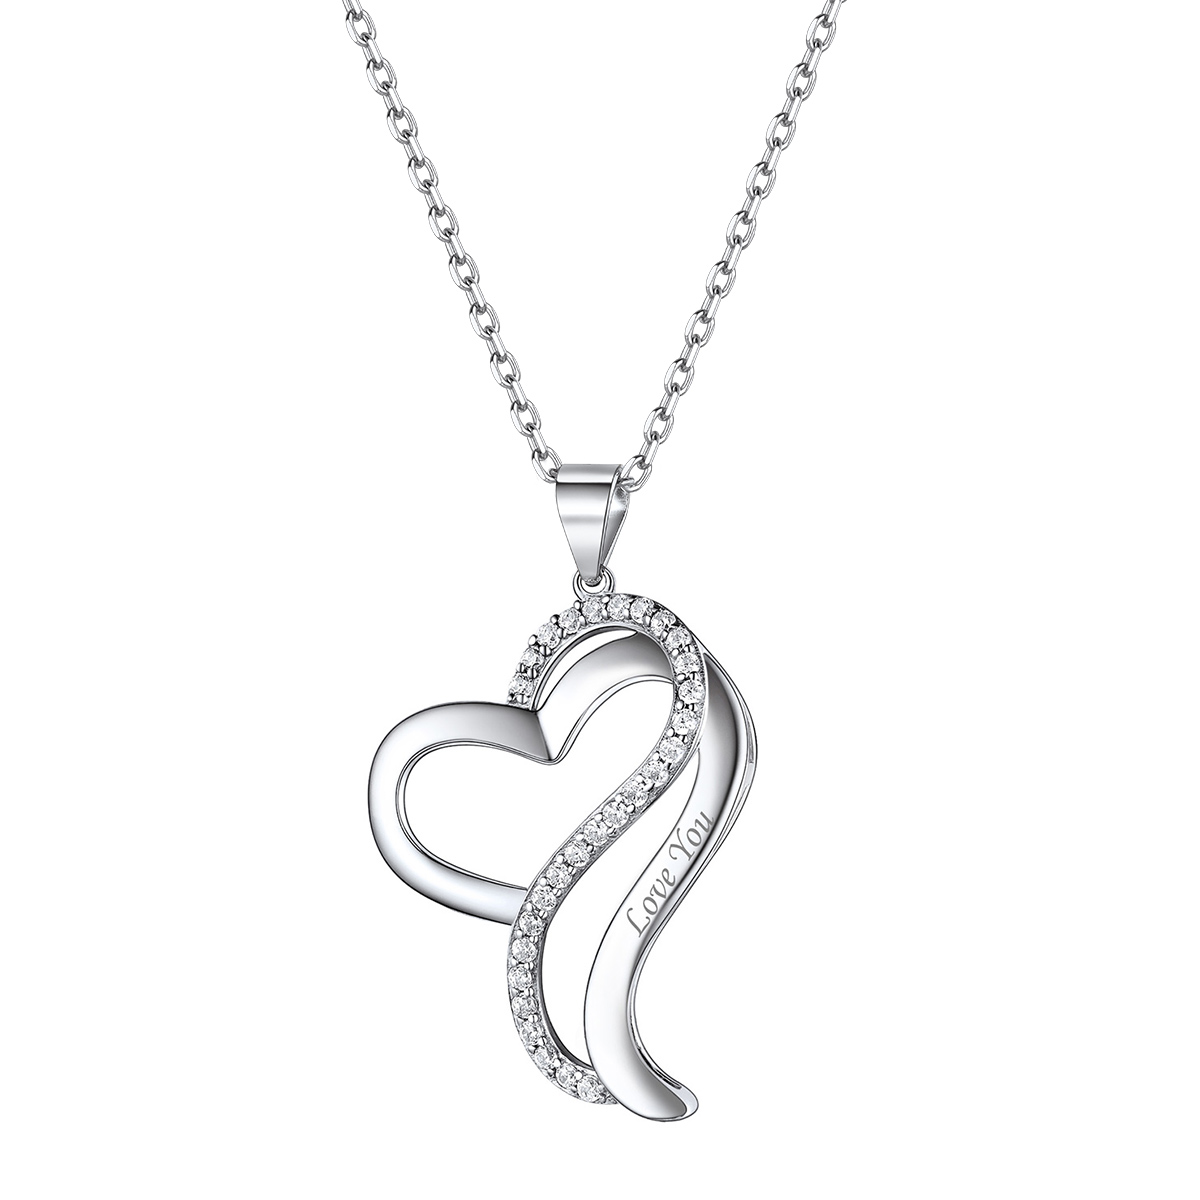 ChicSilver Sterling Silver Heart Necklace For Women